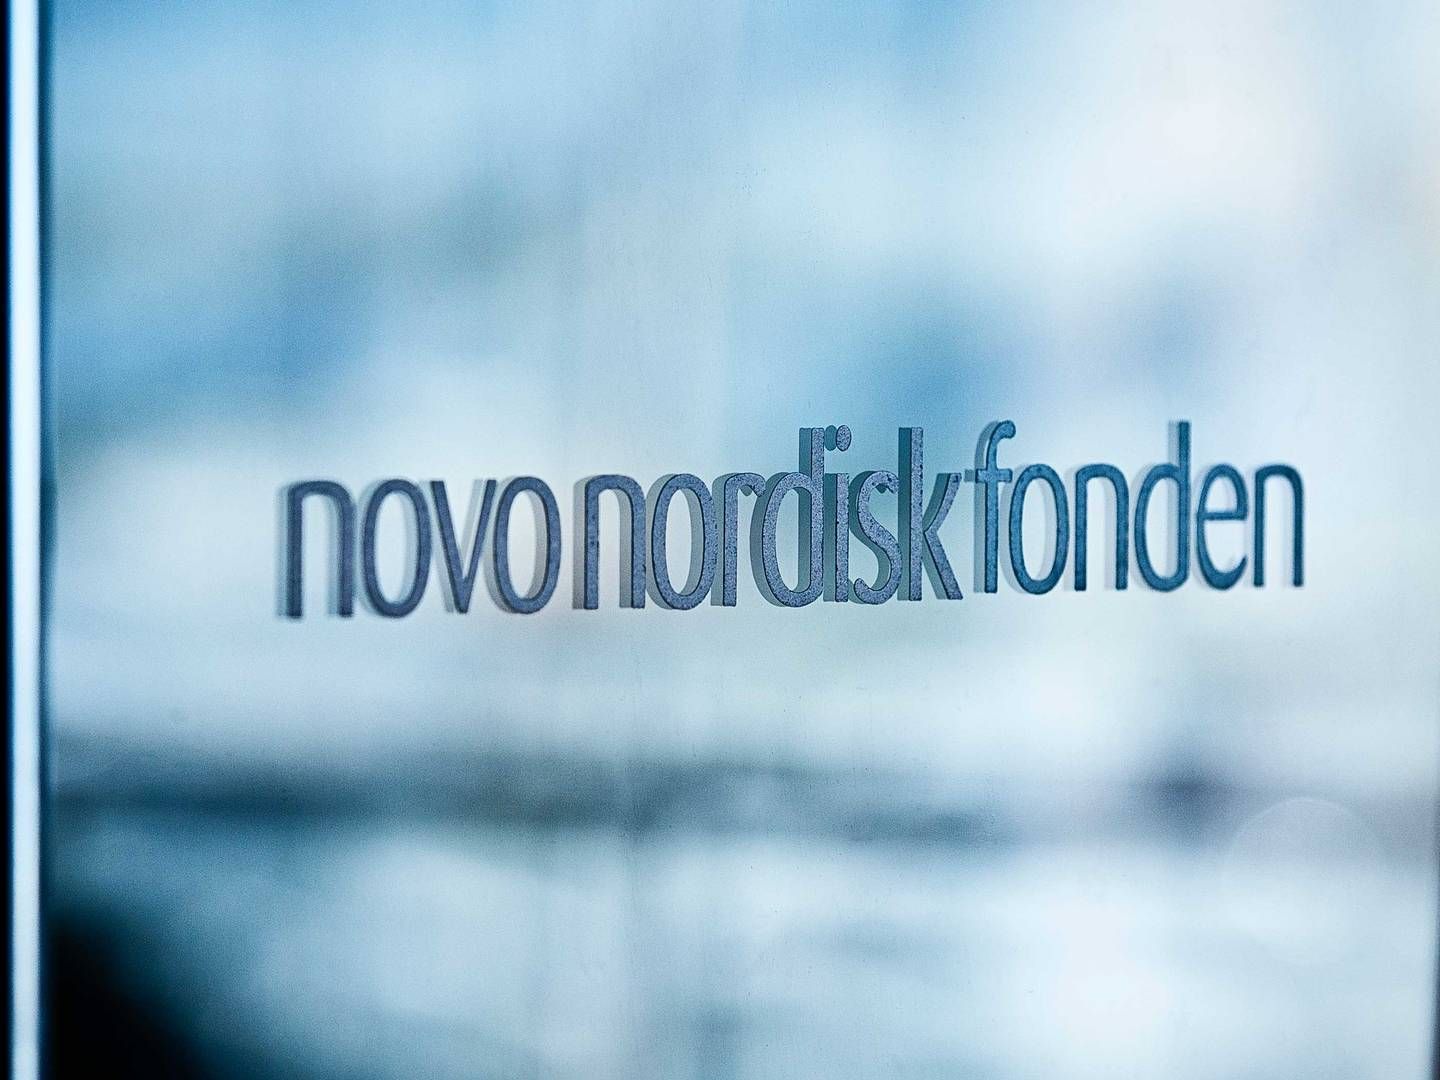 Researchers fear losing support for their research if making any critical statement about the Novo Nordisk Foundation | Foto: Novo Nordisk Fonden / Pr